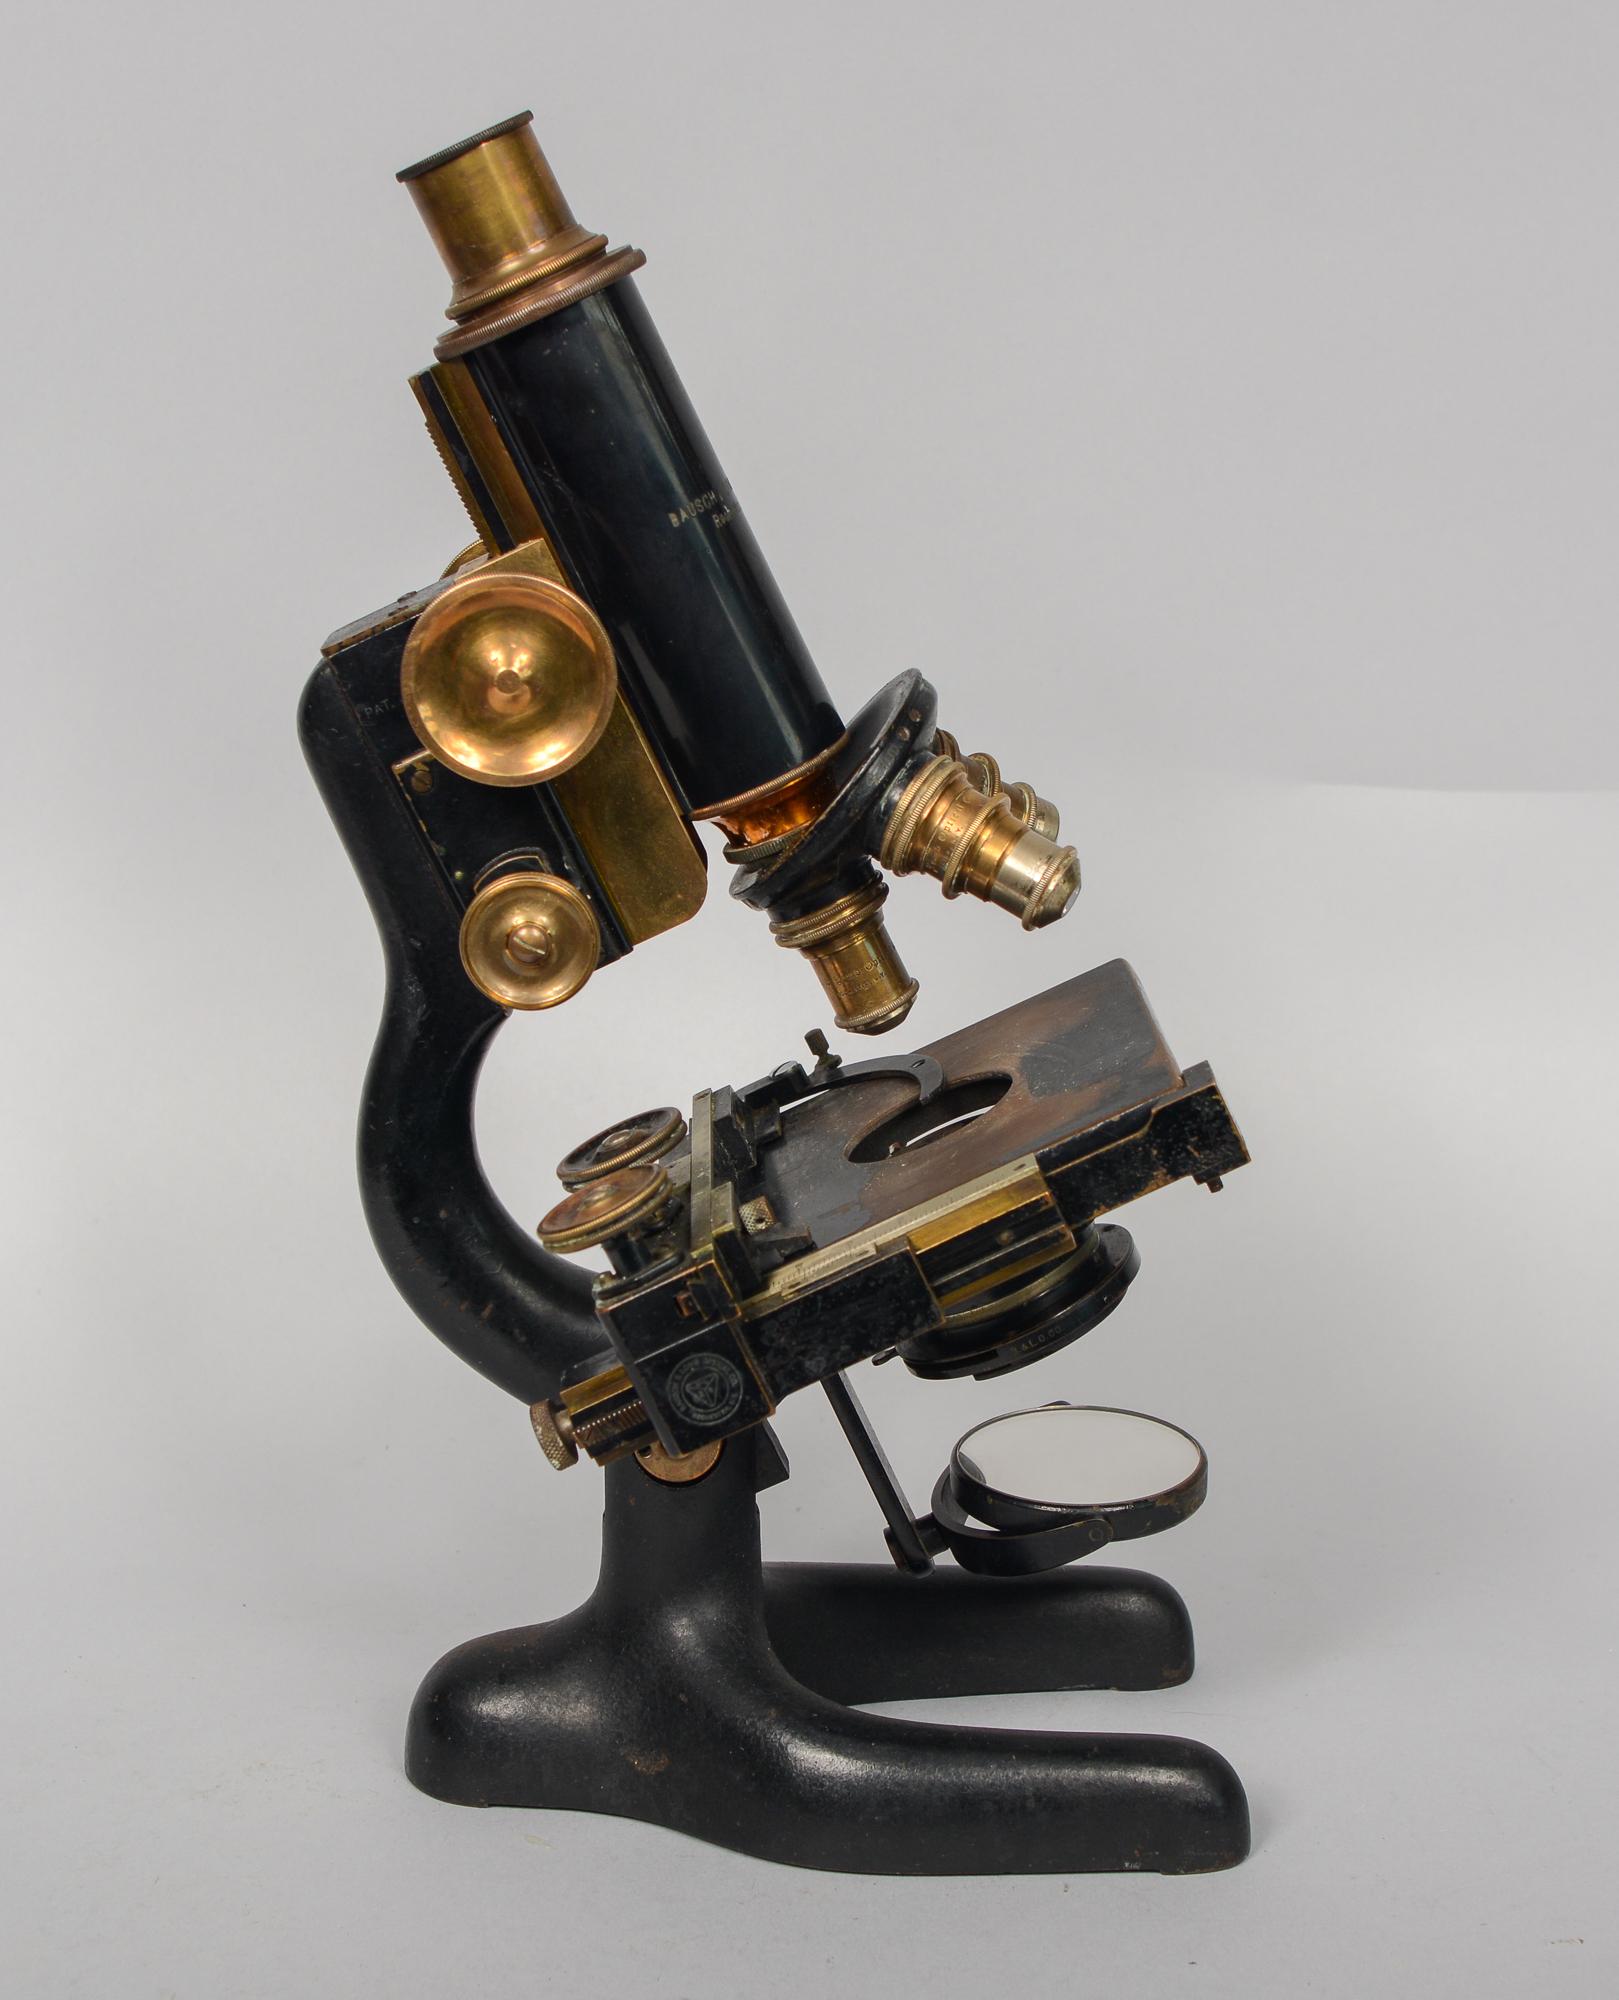 Brass Bausch and Lomb microscope. There is a patent date of Jan. 5, 1915 on this. This microscope has three objectives. The stage has an adjustable slide holder. This is from an older collection belonging to a doctor. We do not know the